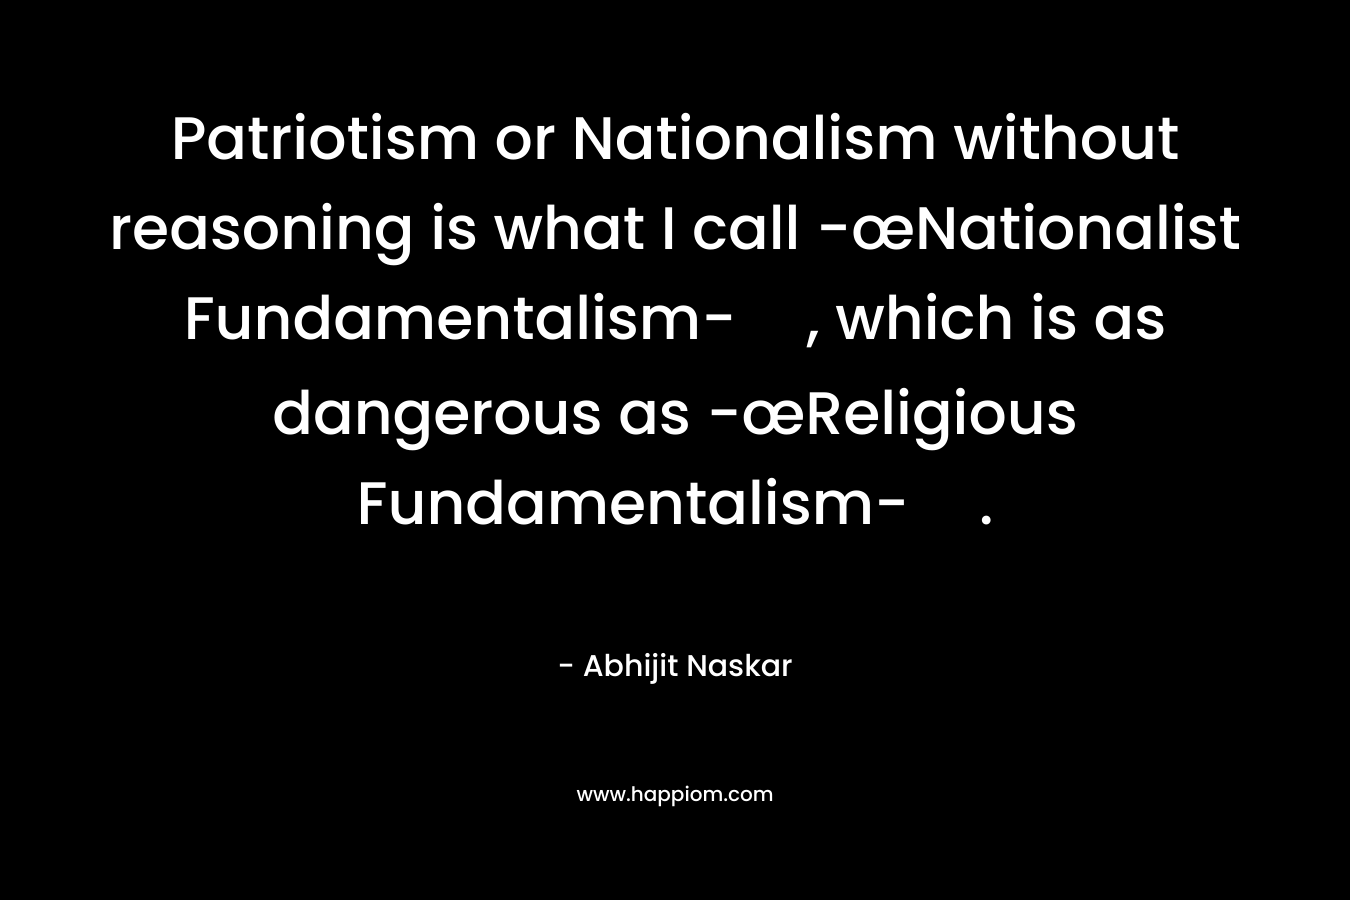 Patriotism or Nationalism without reasoning is what I call -œNationalist Fundamentalism-, which is as dangerous as -œReligious Fundamentalism-. – Abhijit Naskar